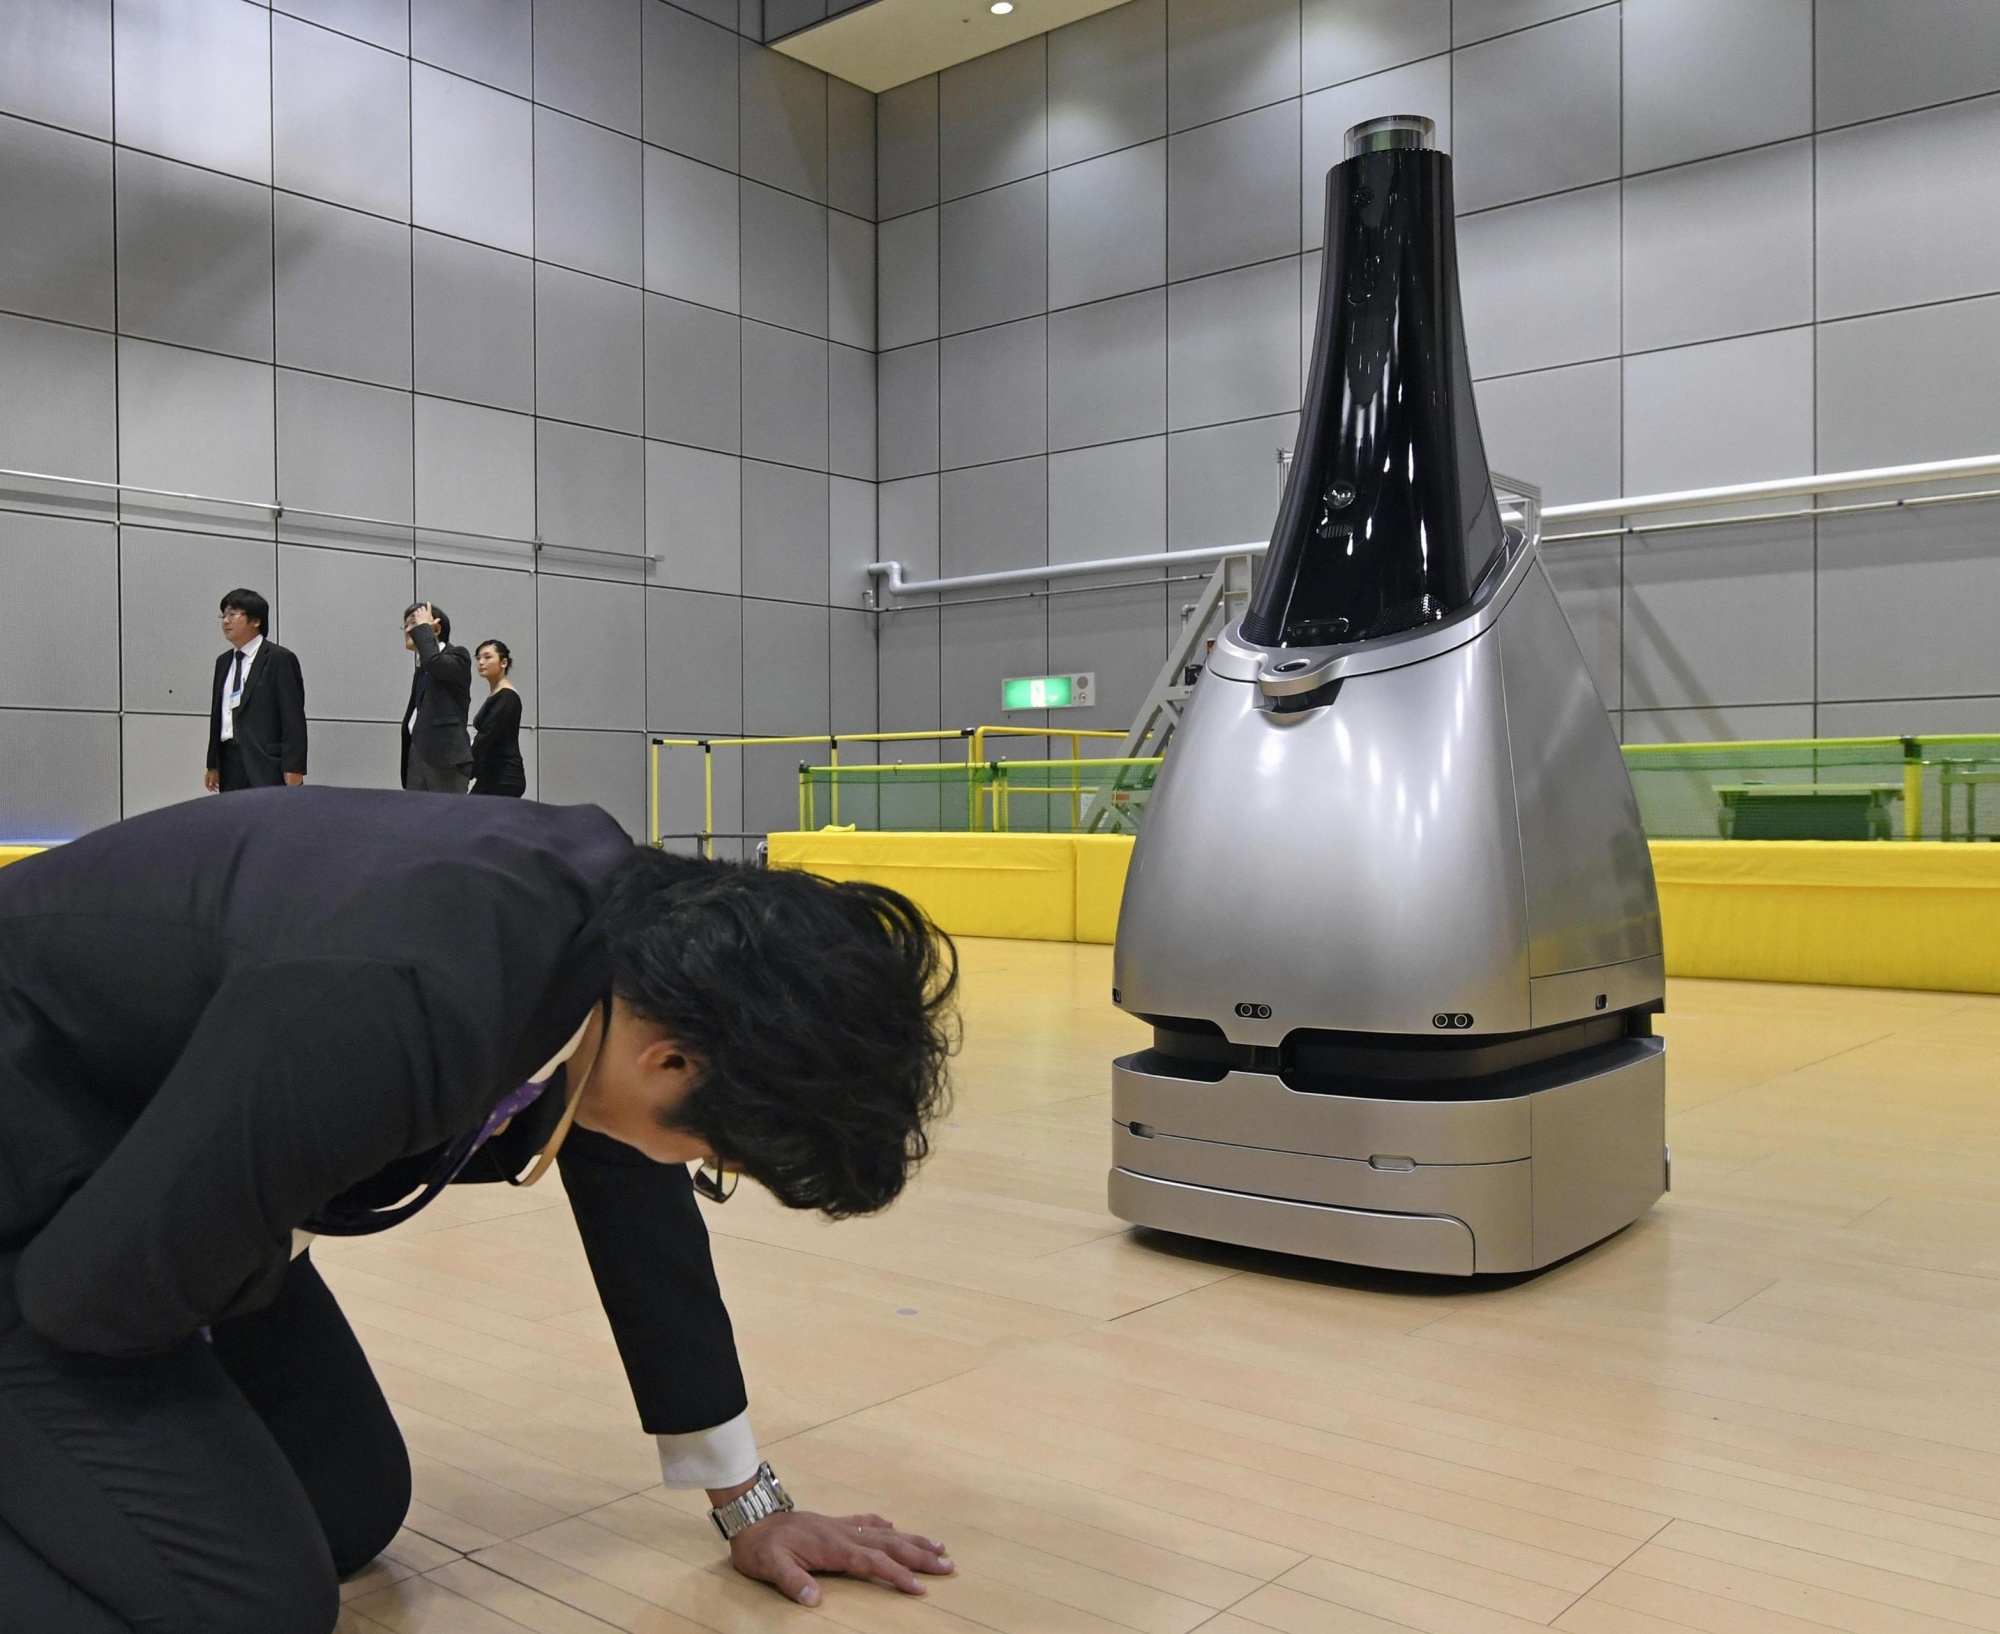 Robot security guard to be tested at station in bid to security ahead of Games | The Japan Times